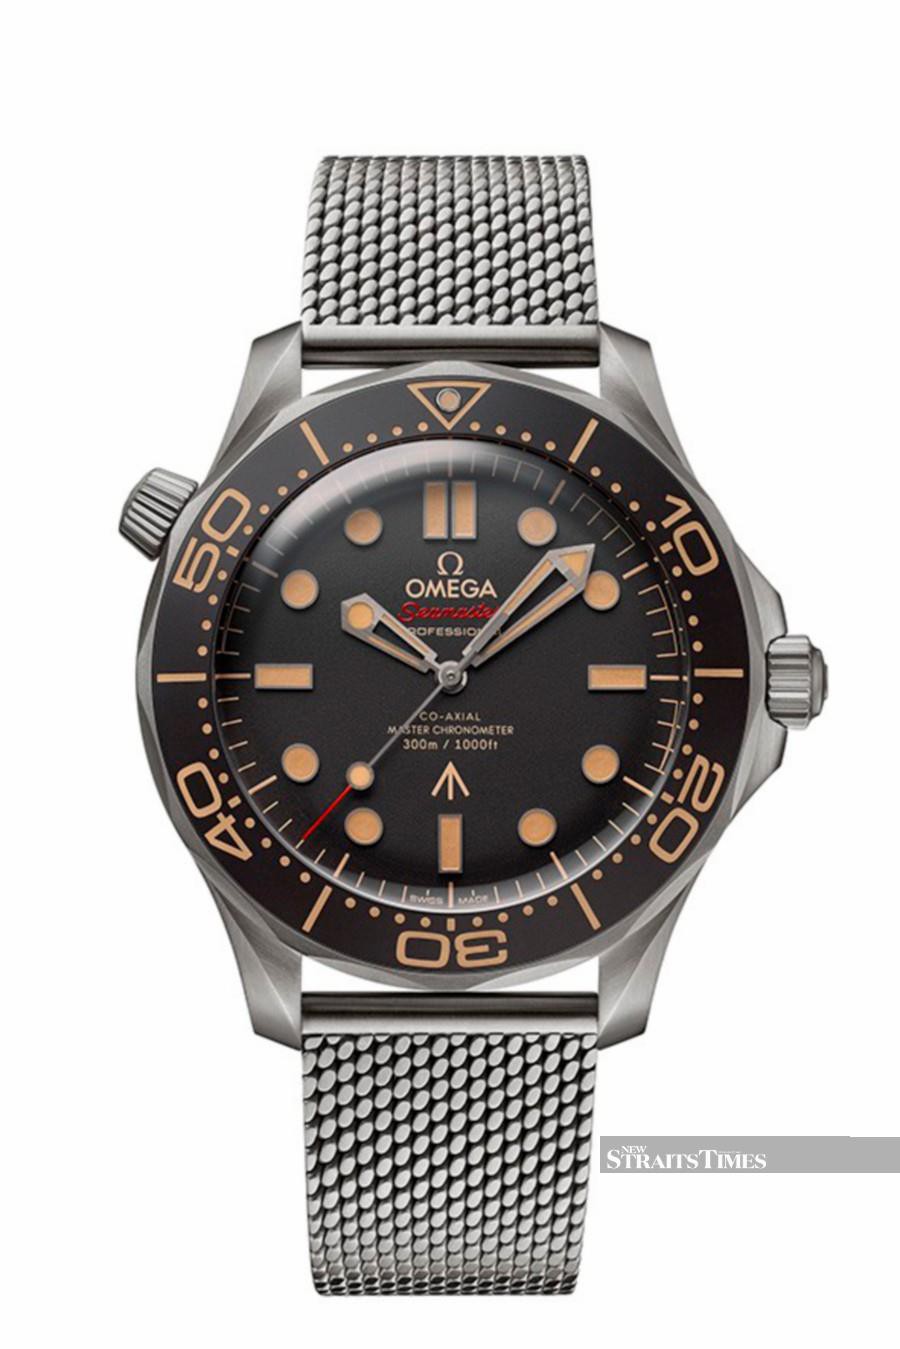 Omega introduced a special Seamaster Diver 300M 007 Edition.